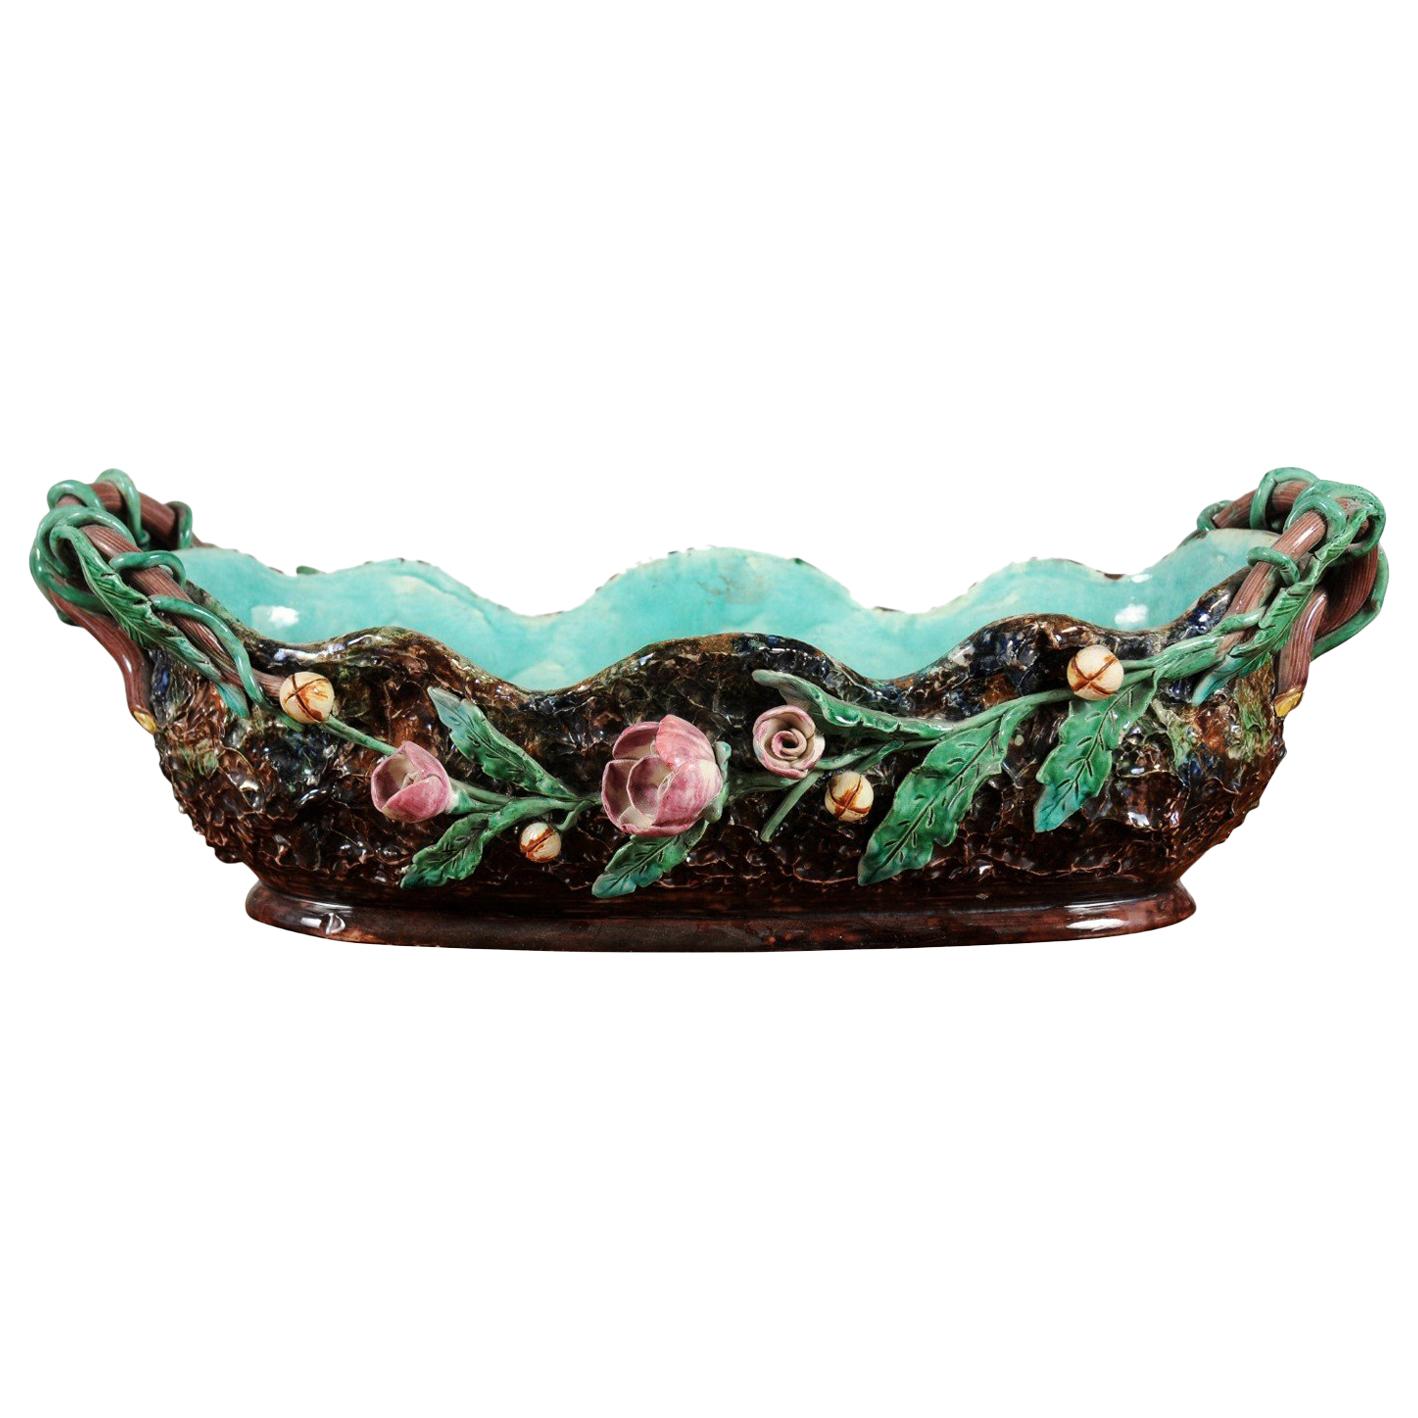 French 1850s Barbotine Majolica Jardinière by Thomas Sargent with Floral Décor